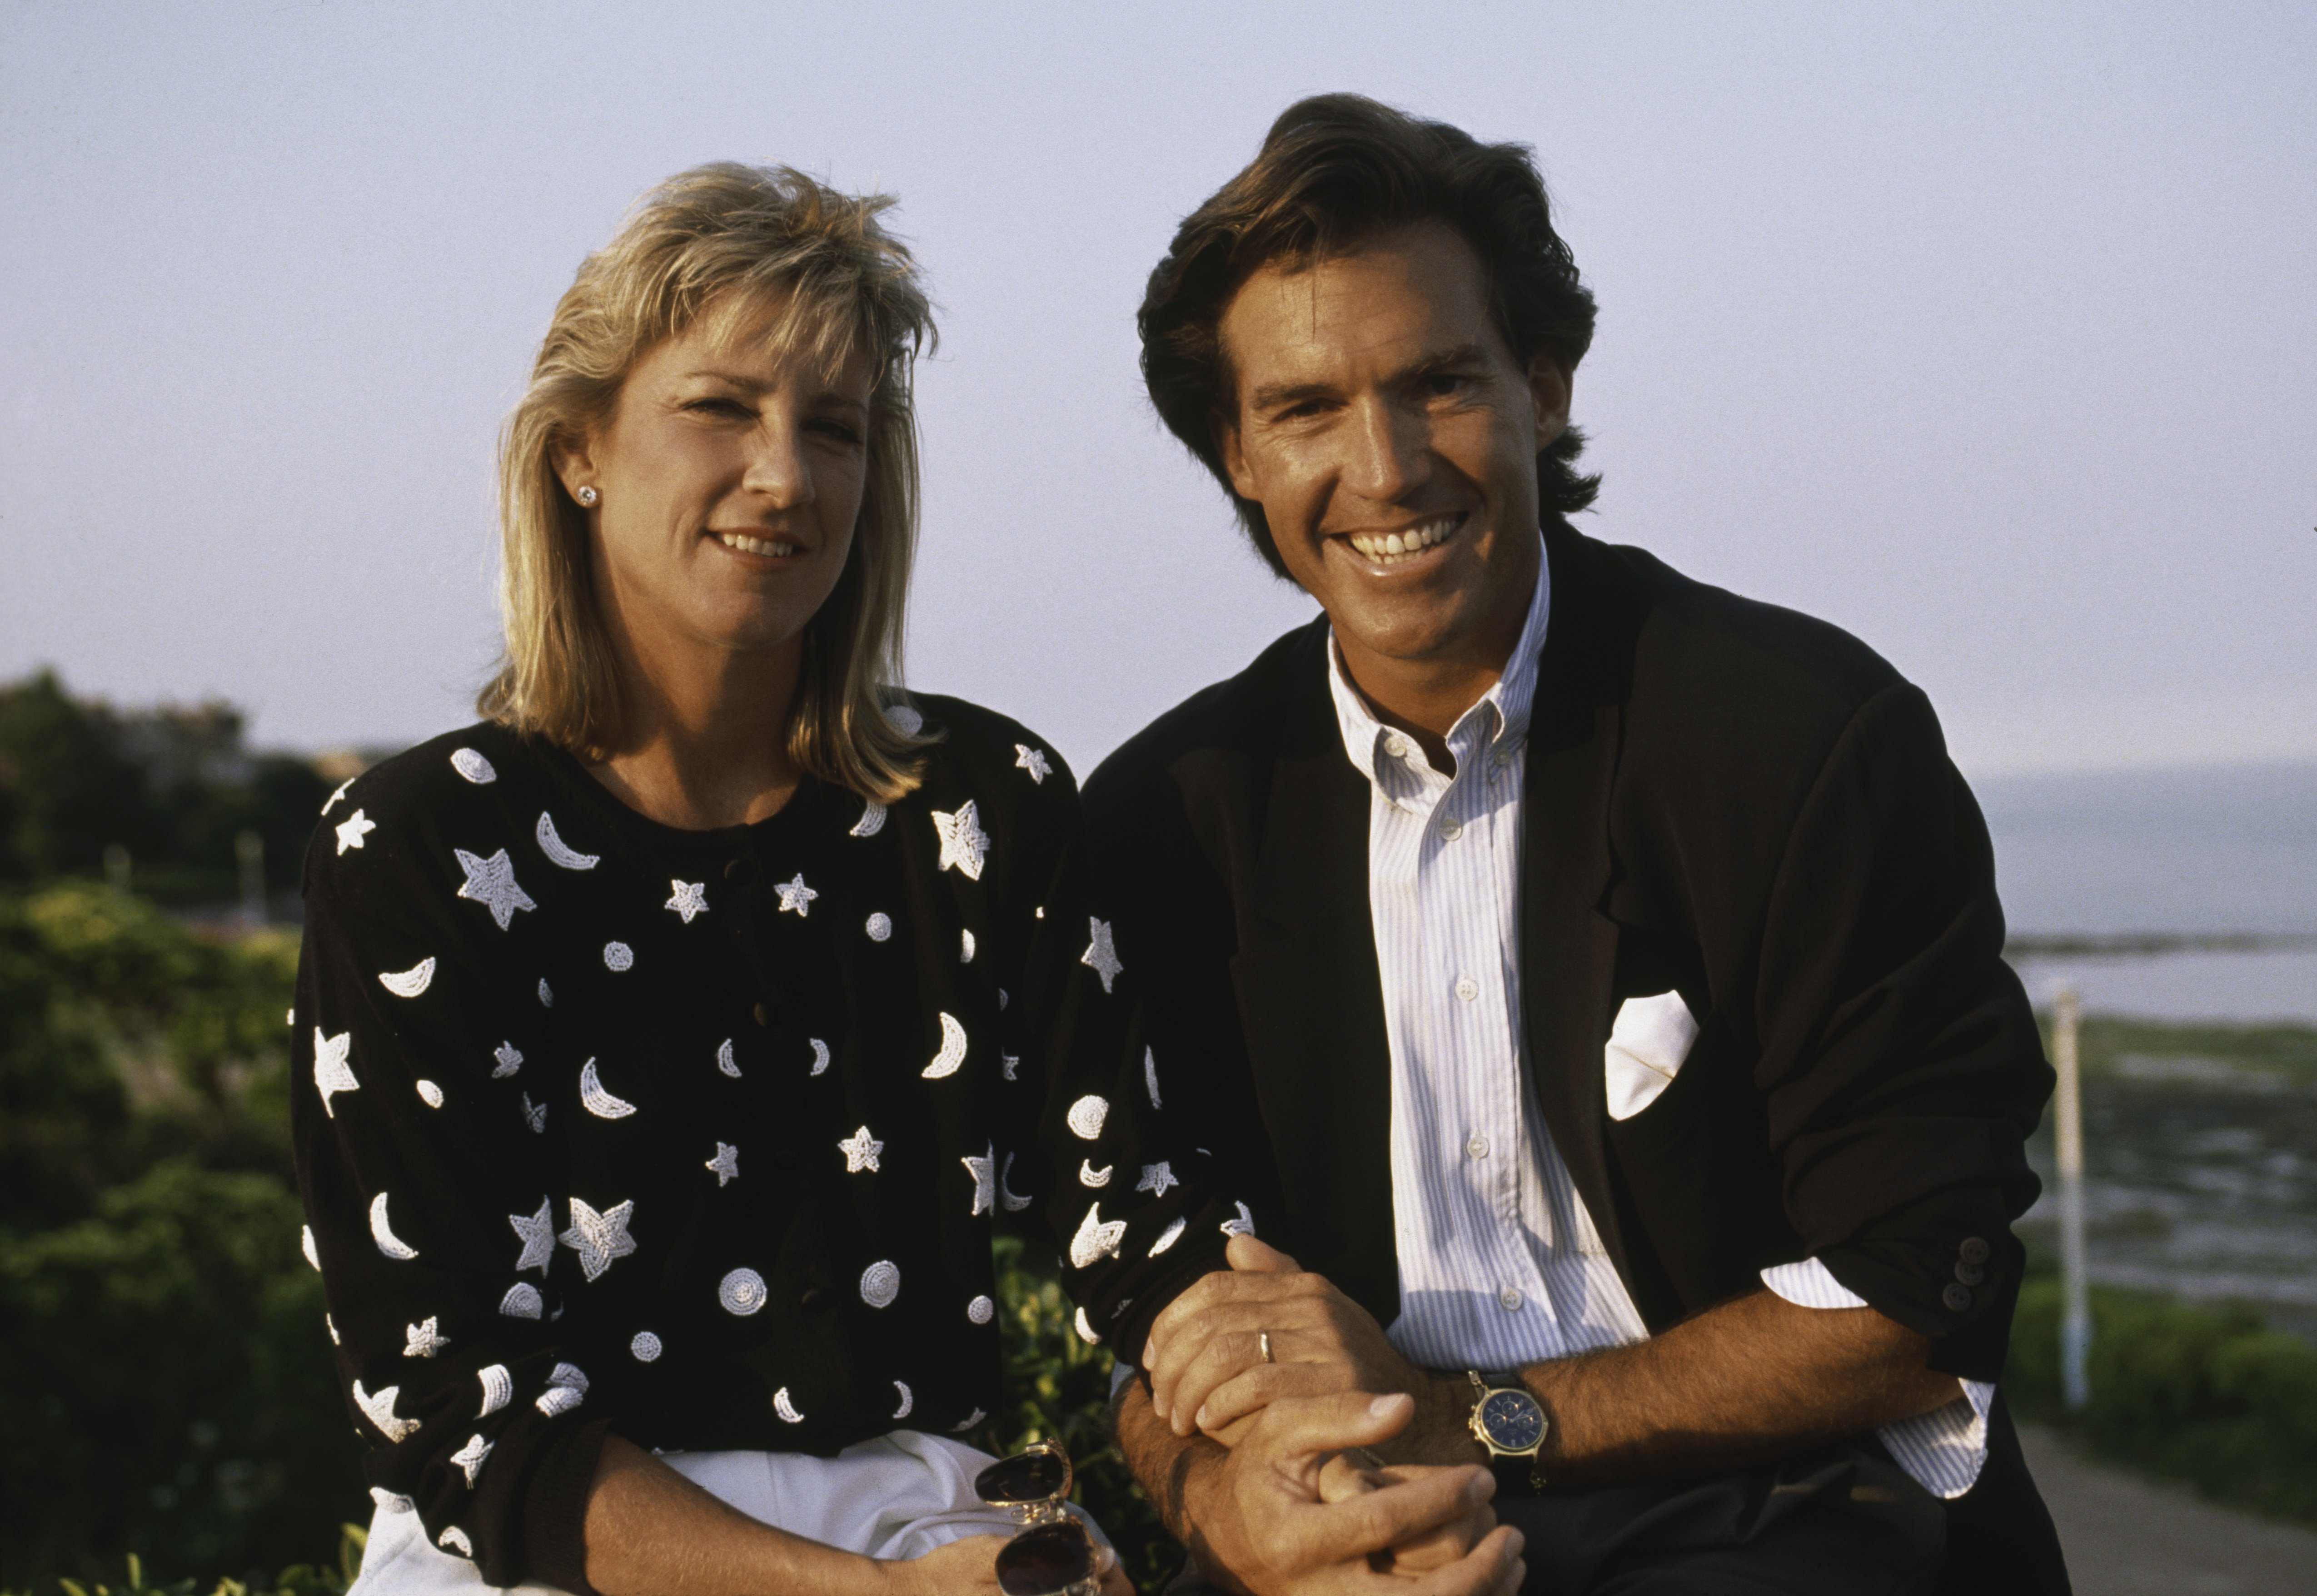 Chris Evert and Andy Mill at the 1989 Pilkington Glass Championships Tennis tournament in 1989, in England. | Source: Getty Images